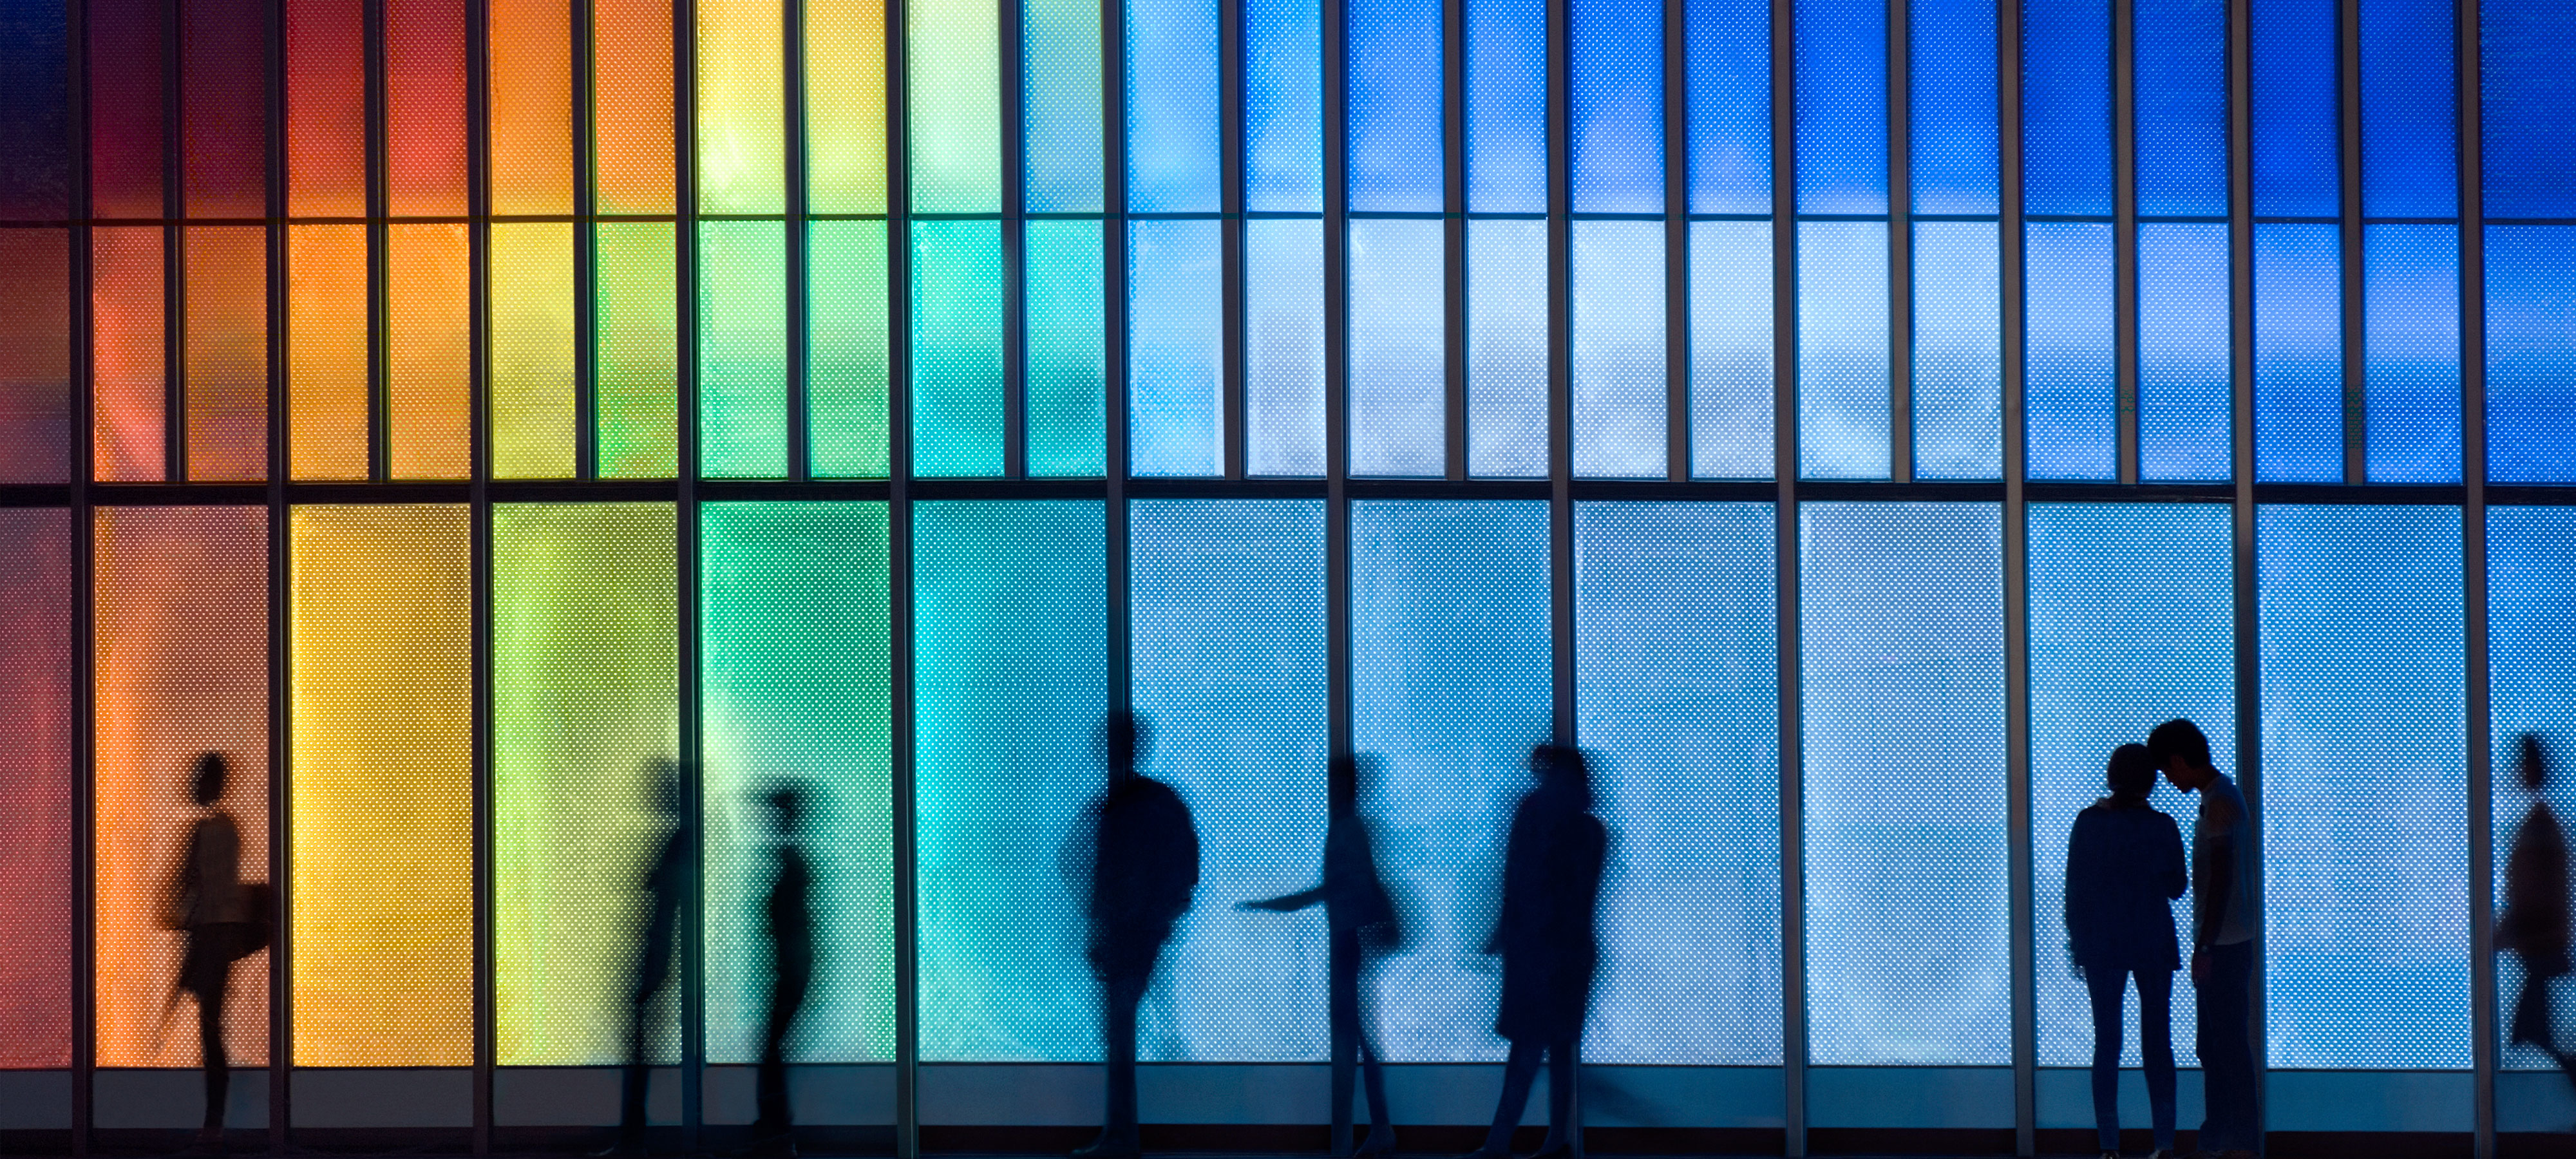 Silhouettes of individuals walking past an LED-lit façade of a building in Hong Kong, China, showcasing vibrant colors that constantly change. There are also two people talking in front of the building.